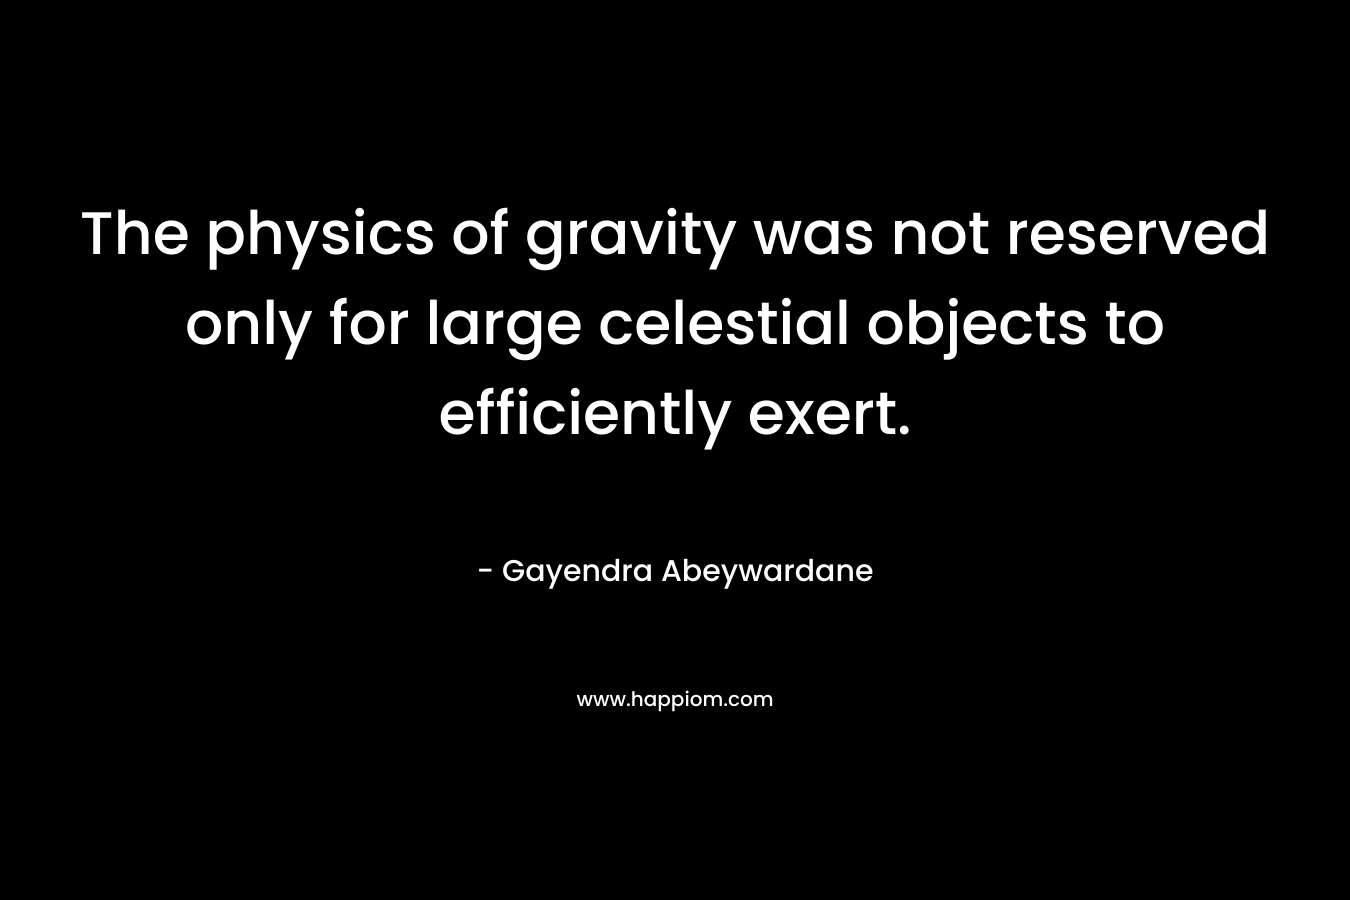 The physics of gravity was not reserved only for large celestial objects to efficiently exert.